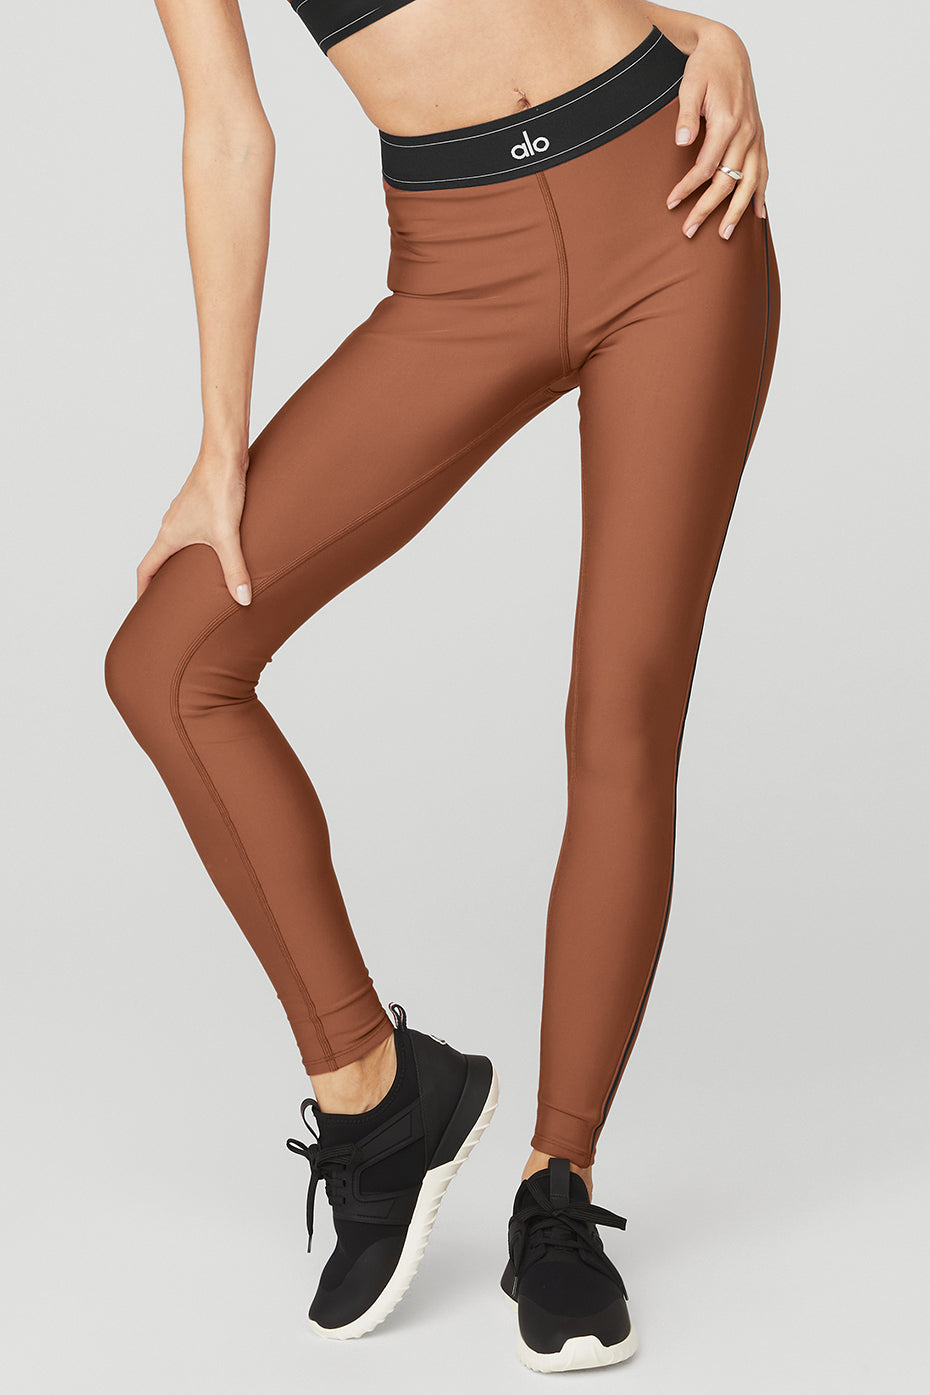 Airlift High Waisted Suit Up Legging